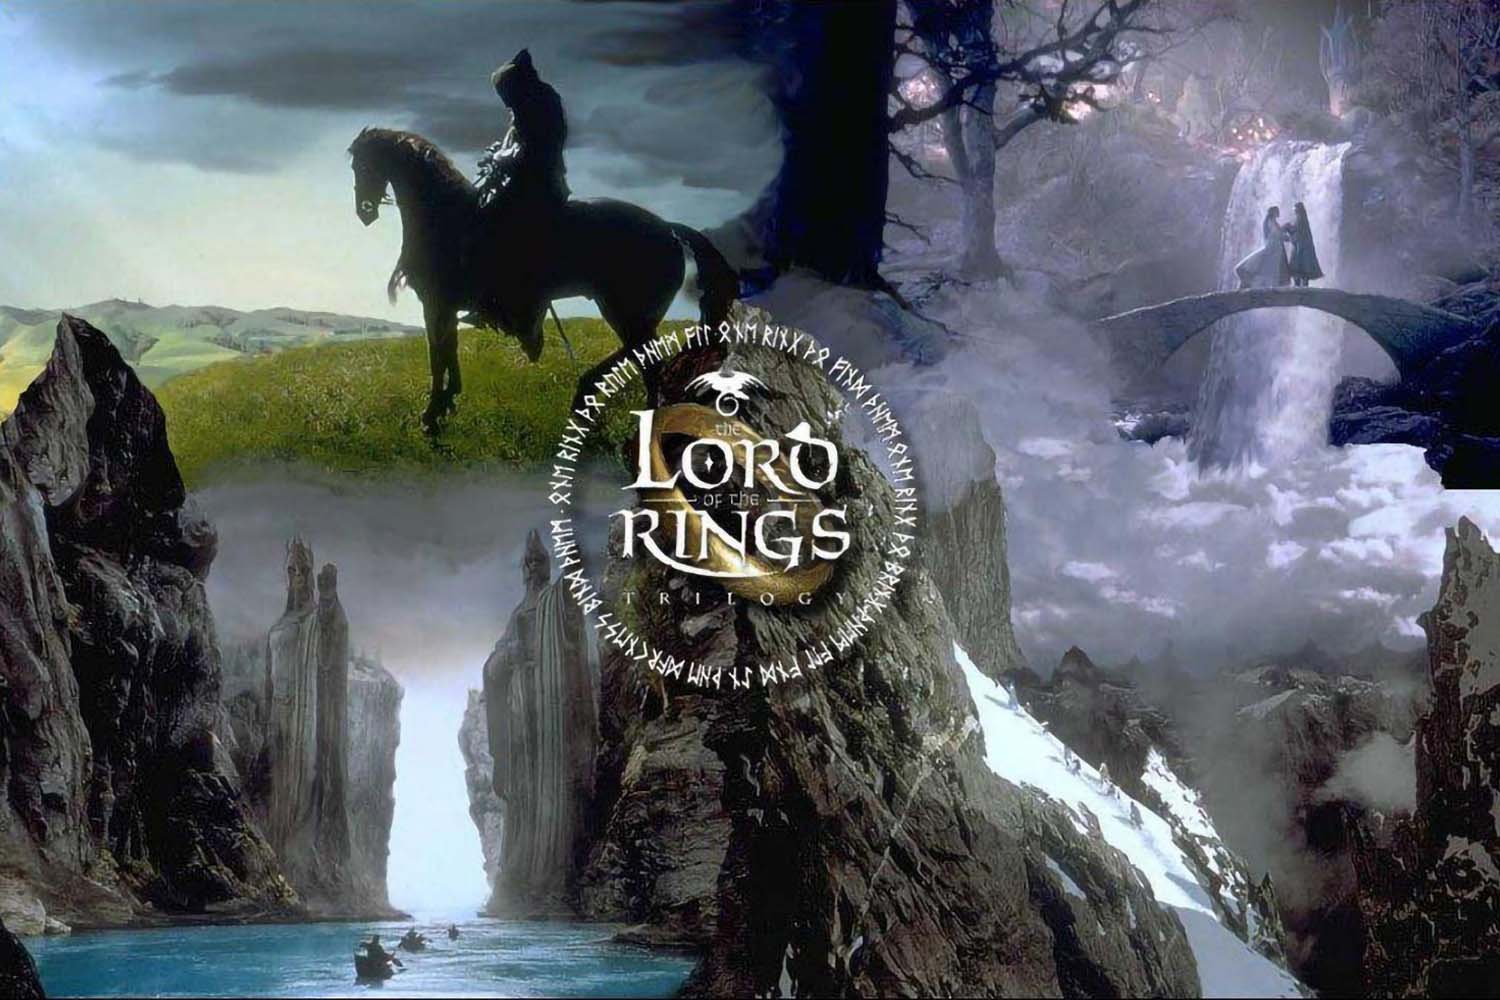 Lord of the Rings wallpaper, in the style of layered landscapes, meticulously crafted scenes, dark and brooding, photo collage landscapes by Ted Tschopp